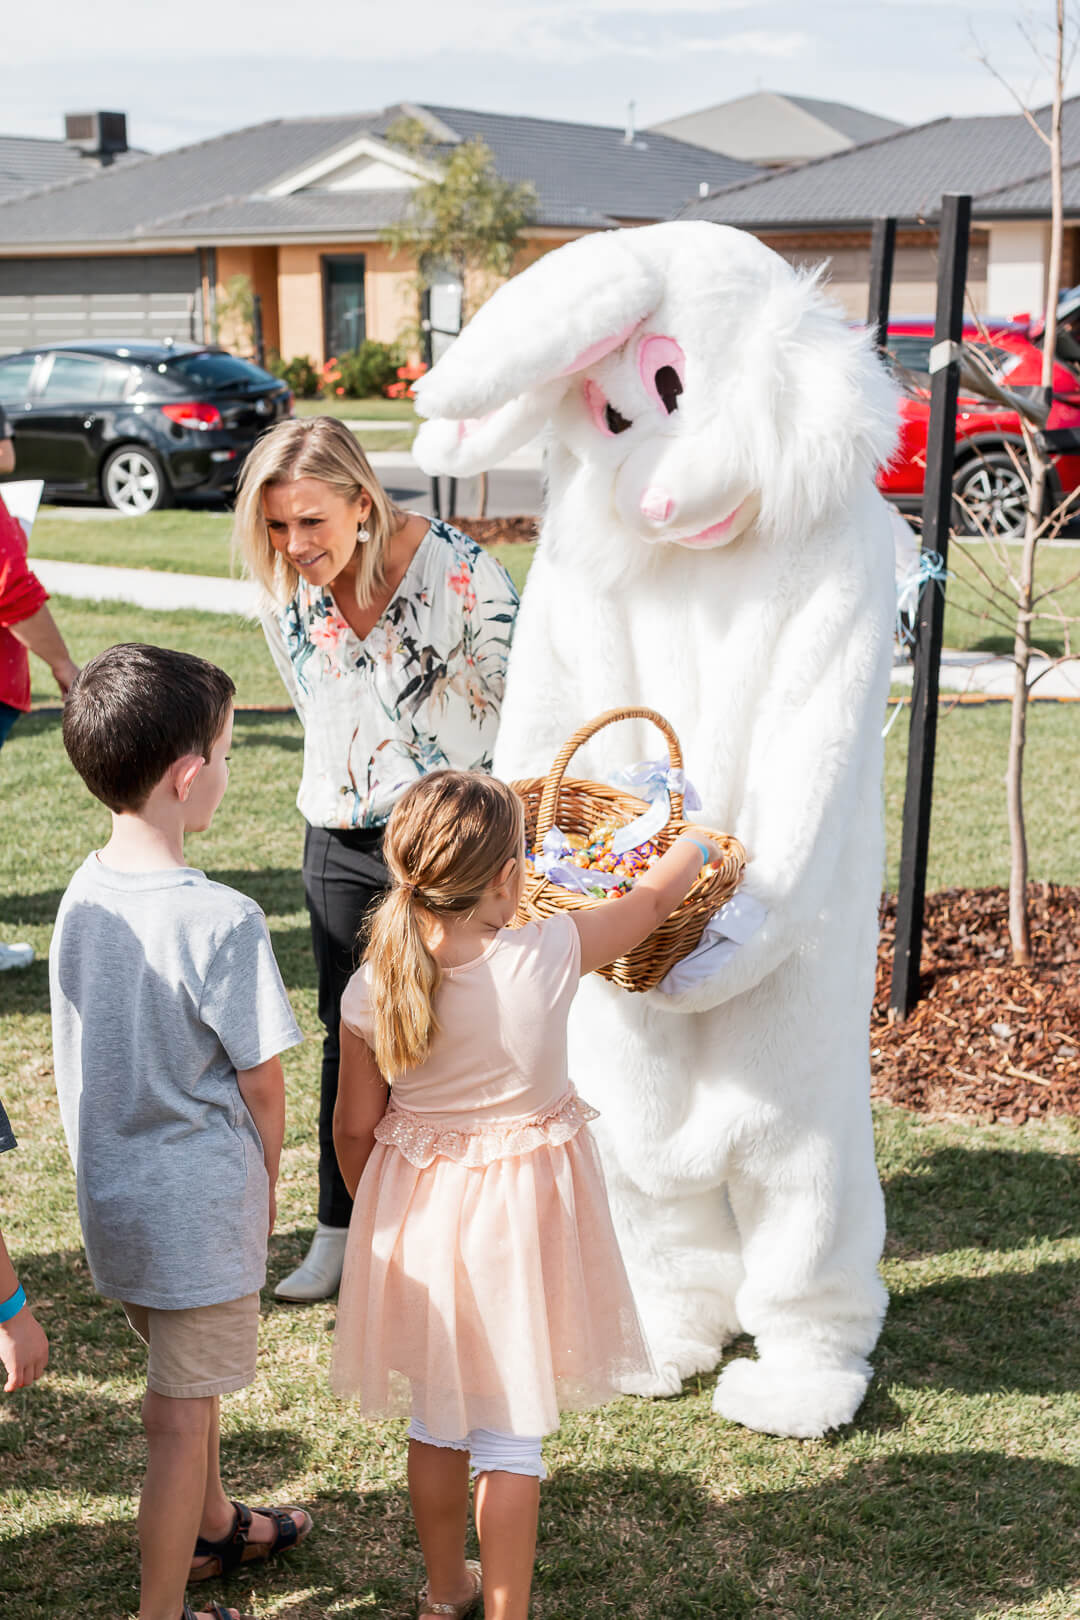 The easter bunny at Arcadia, Officer